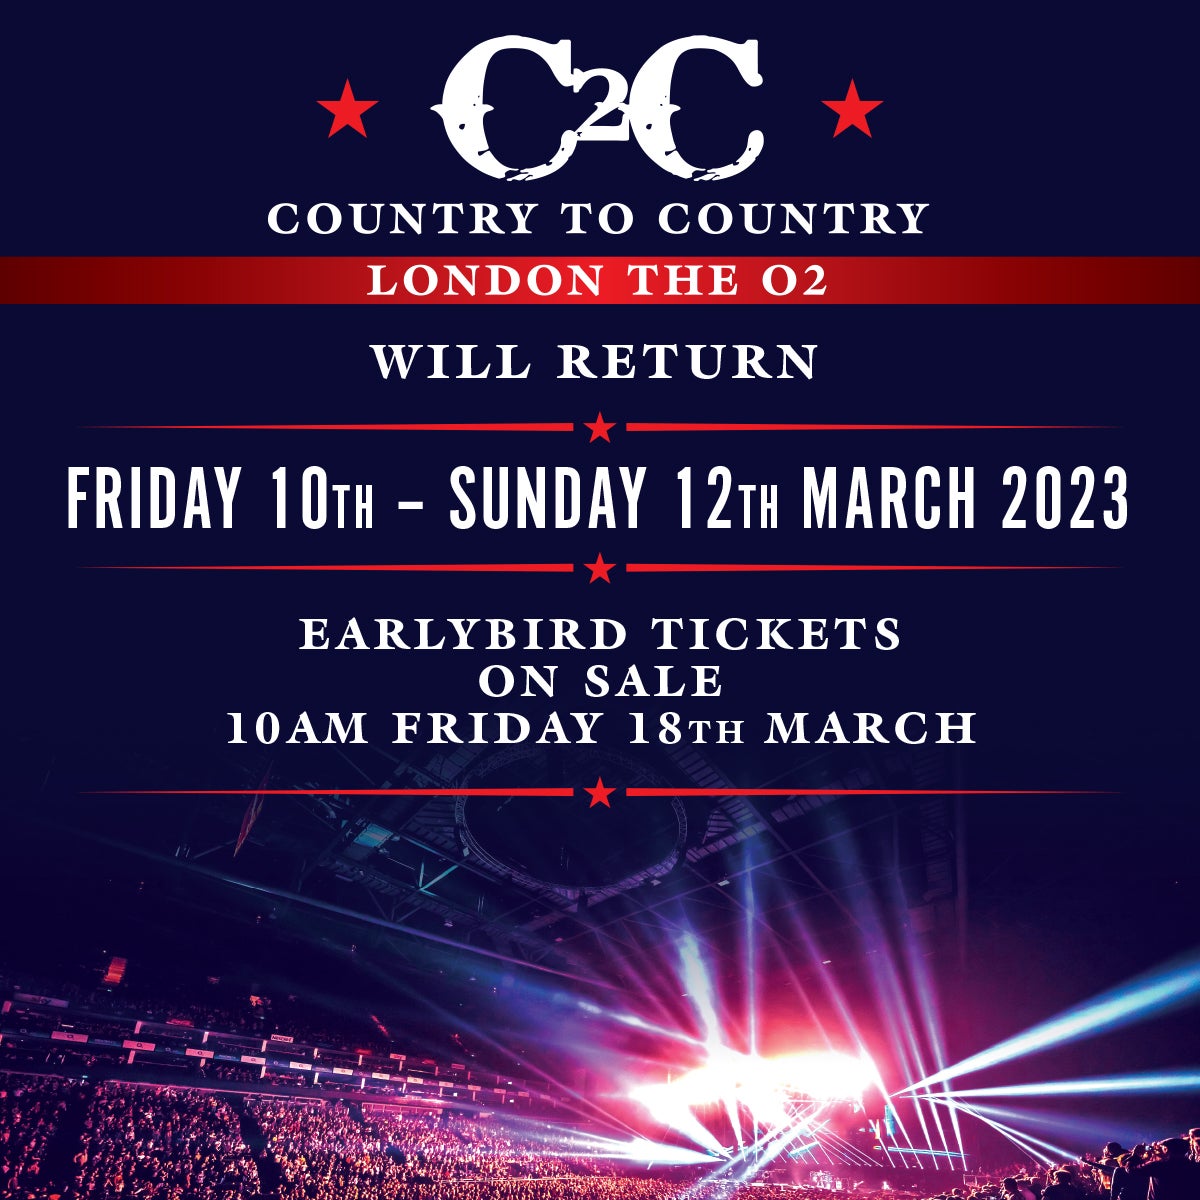 More Info for C2C: Country to Country 2023 